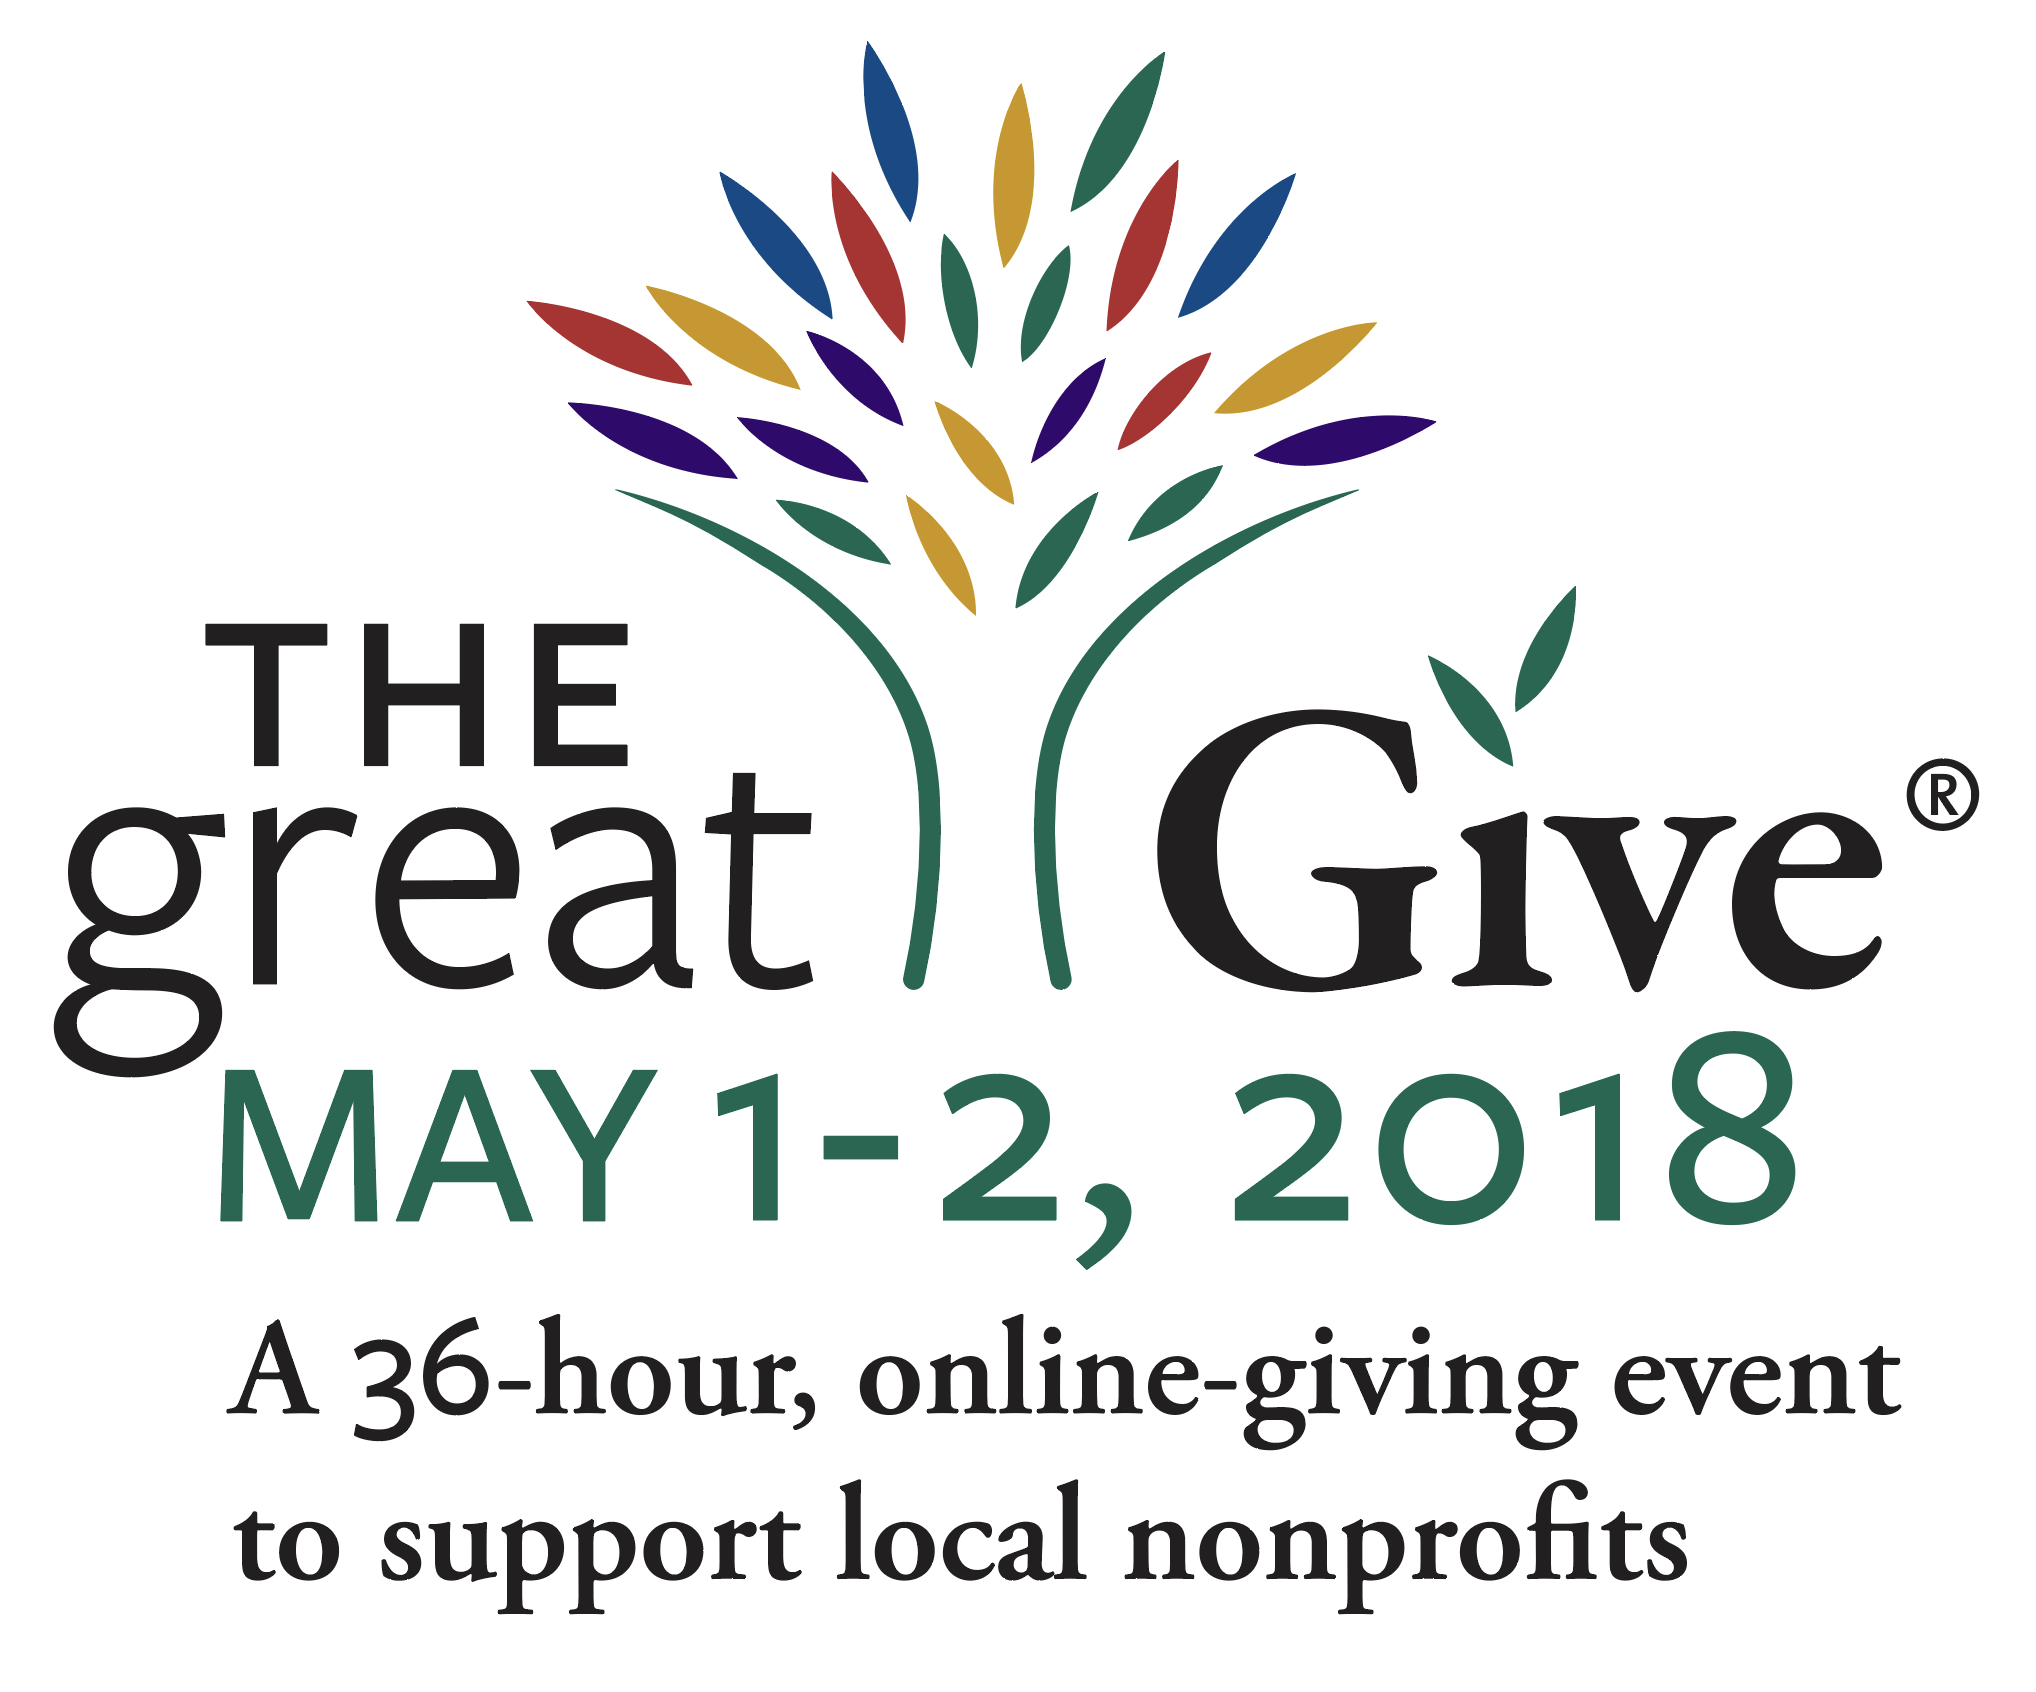 The Great Give 2018